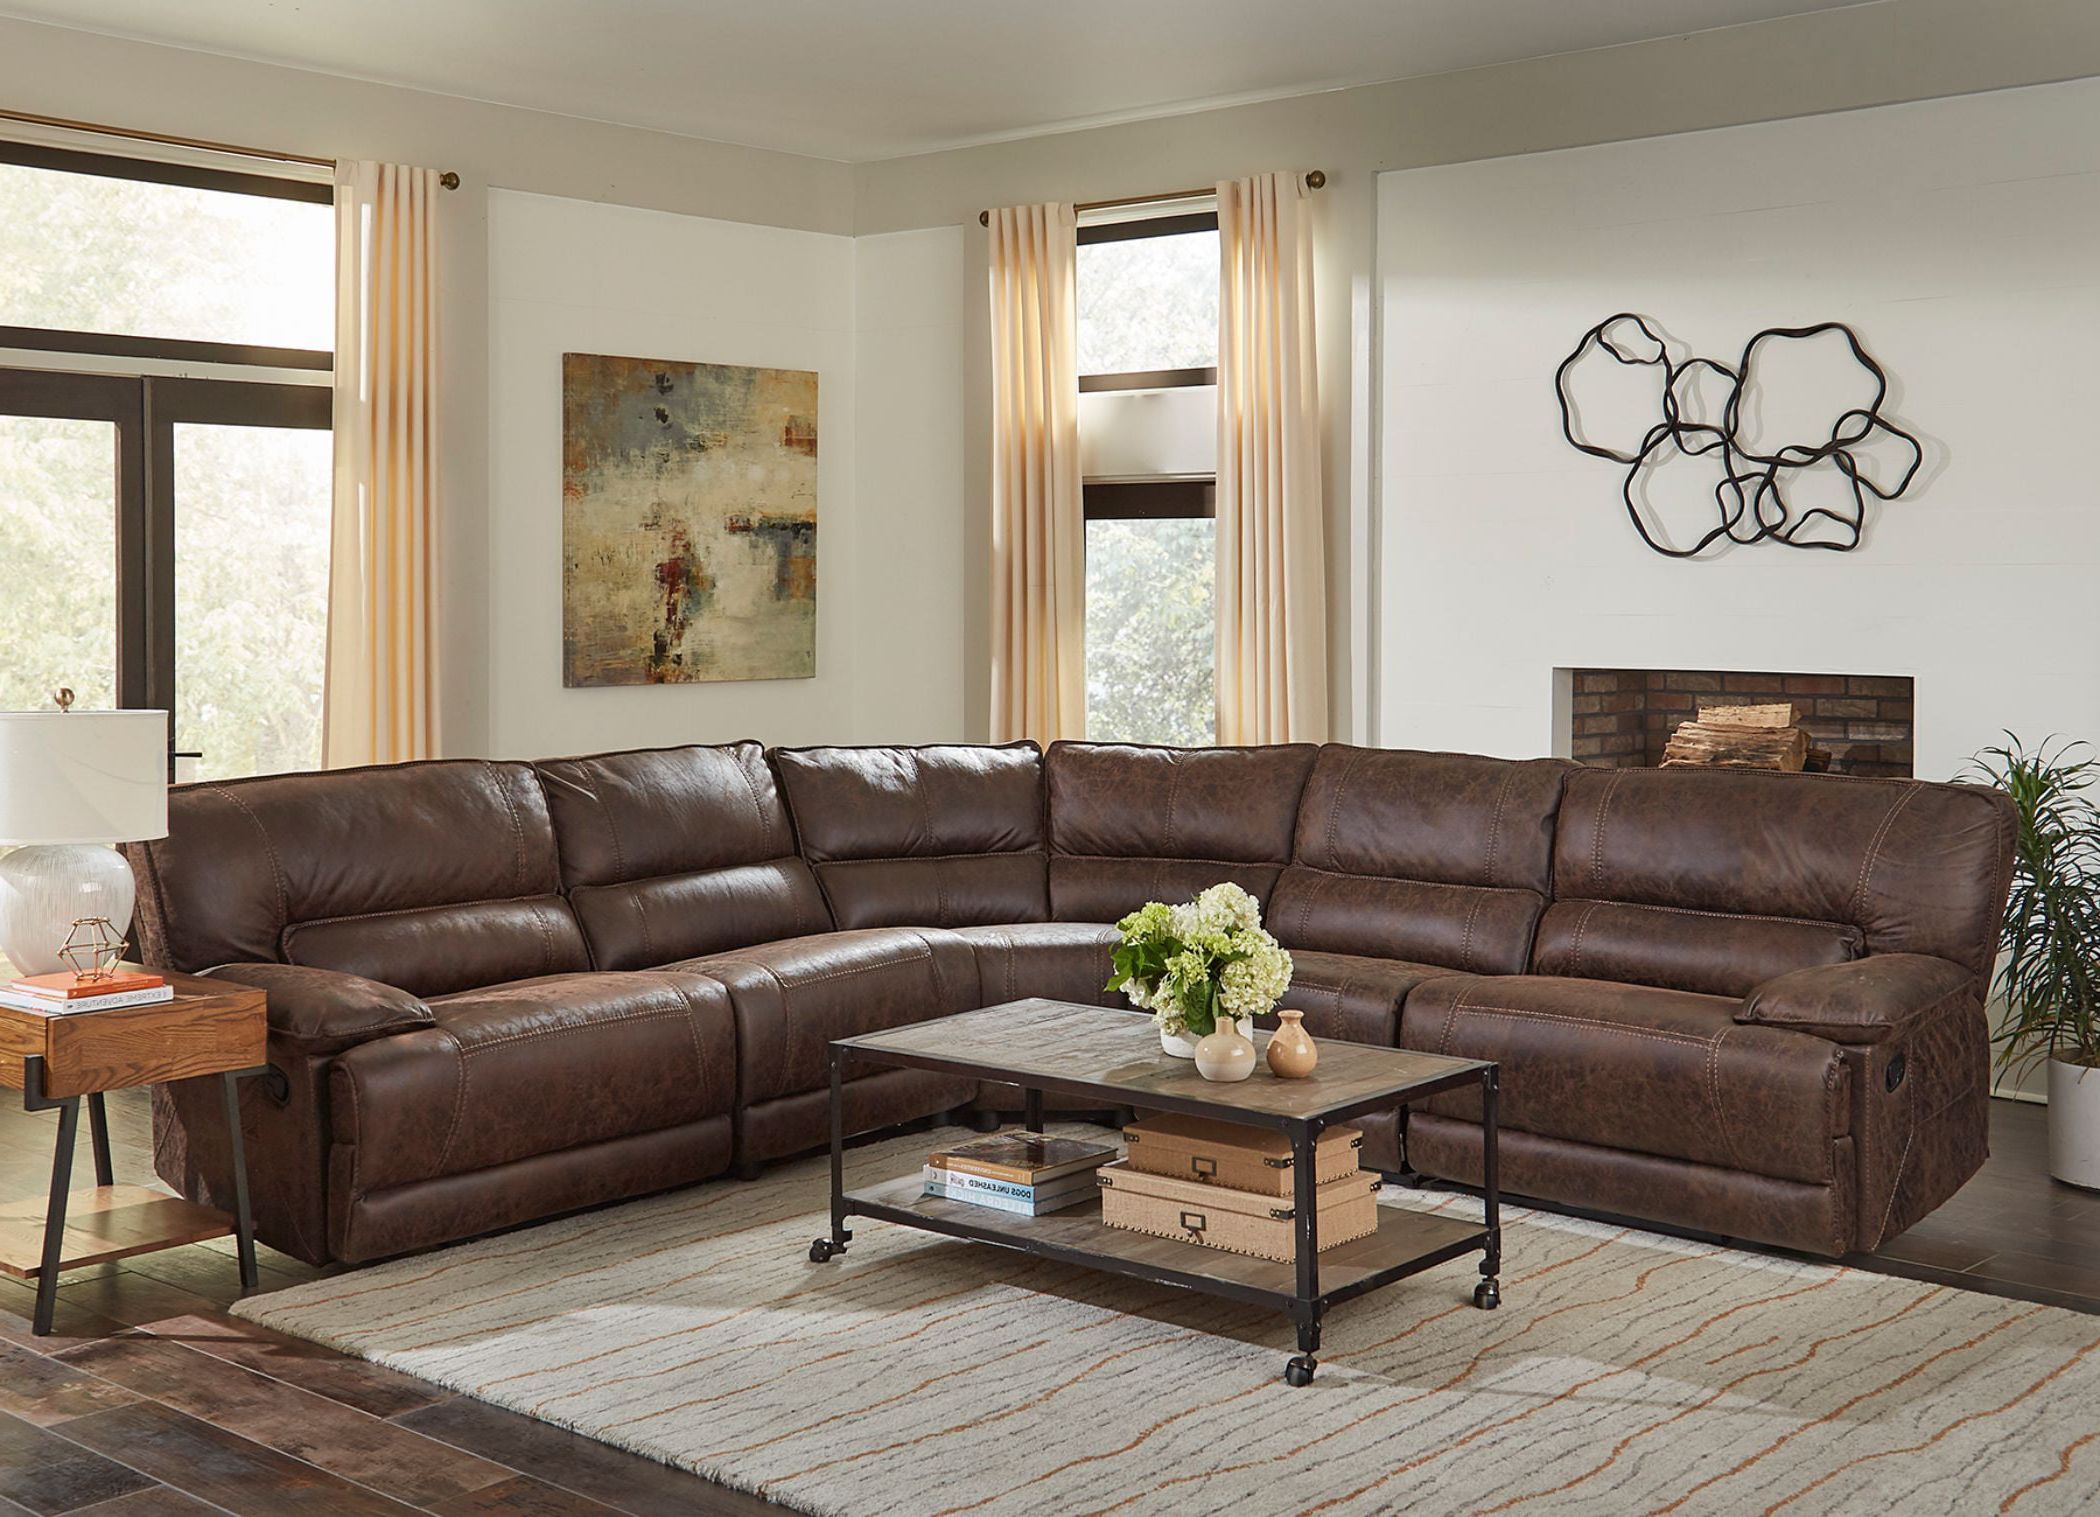 Malyn Weathered Brown Faux Leather Reclining Sectional Sofa With Throughout Most Current Faux Leather Sectional Sofa Sets (View 6 of 15)